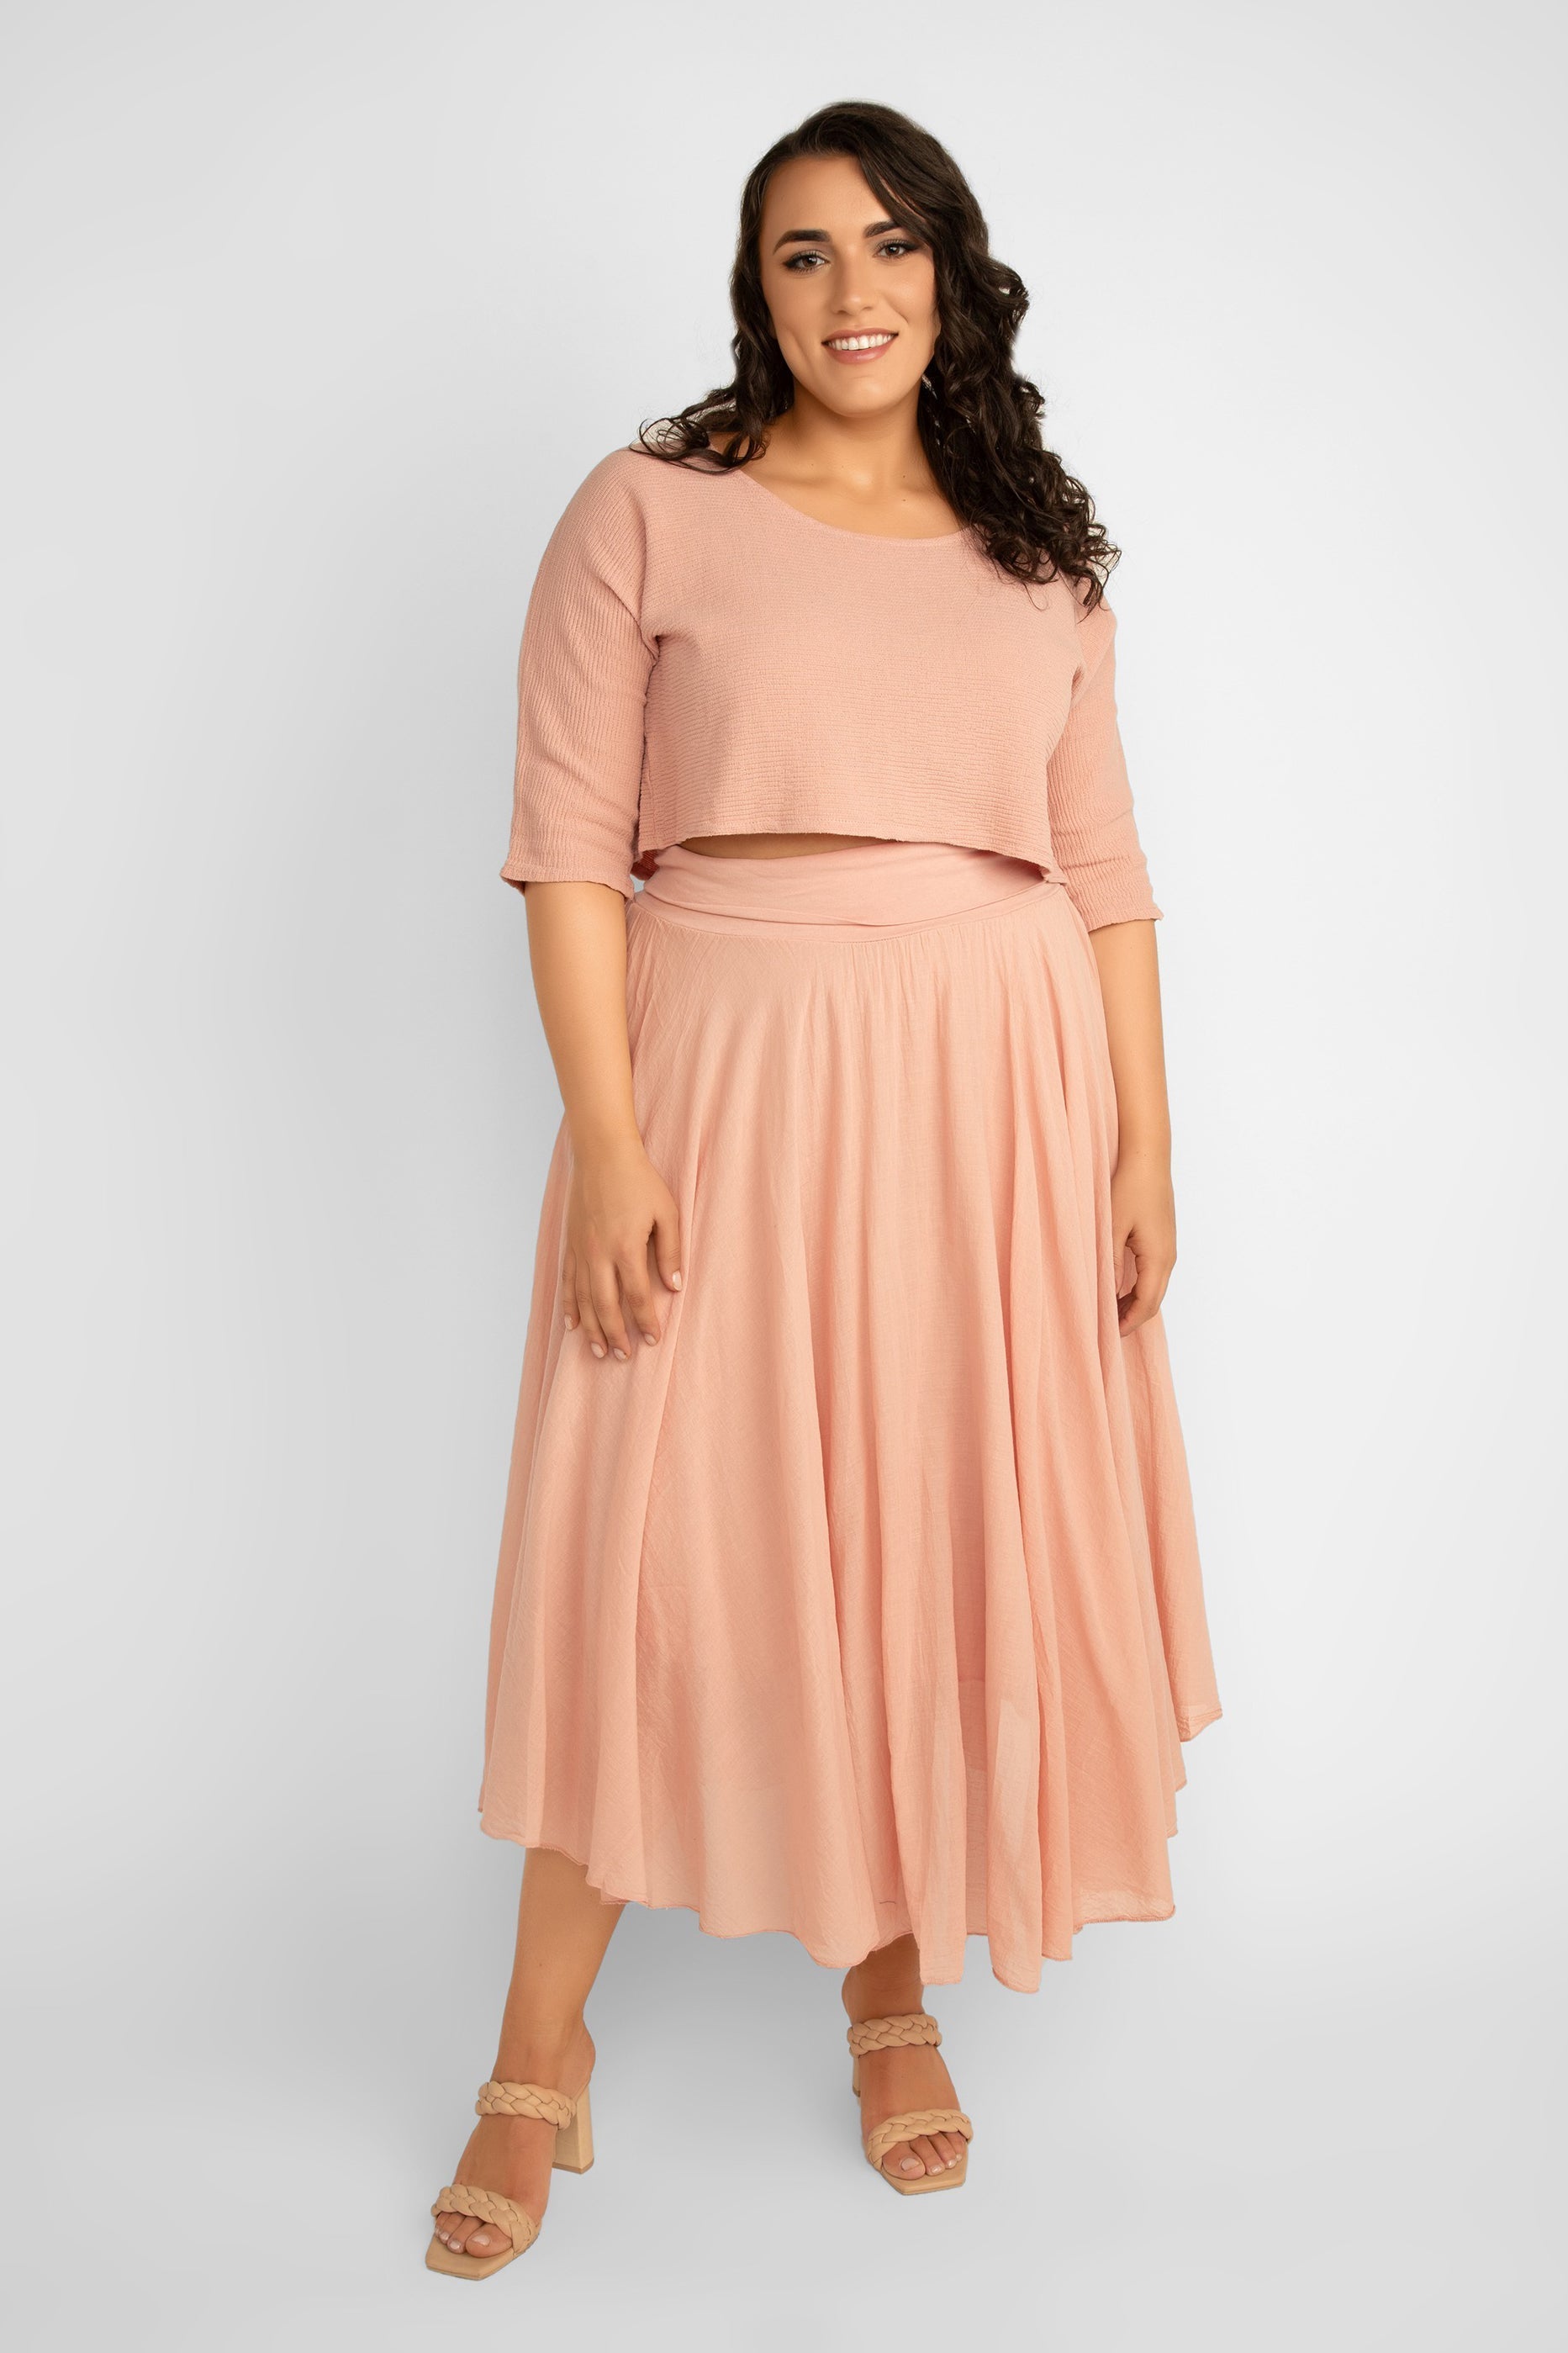 Me & Gee (L-6759) Flowy Cotton Maxi Skirt in Rose Pink